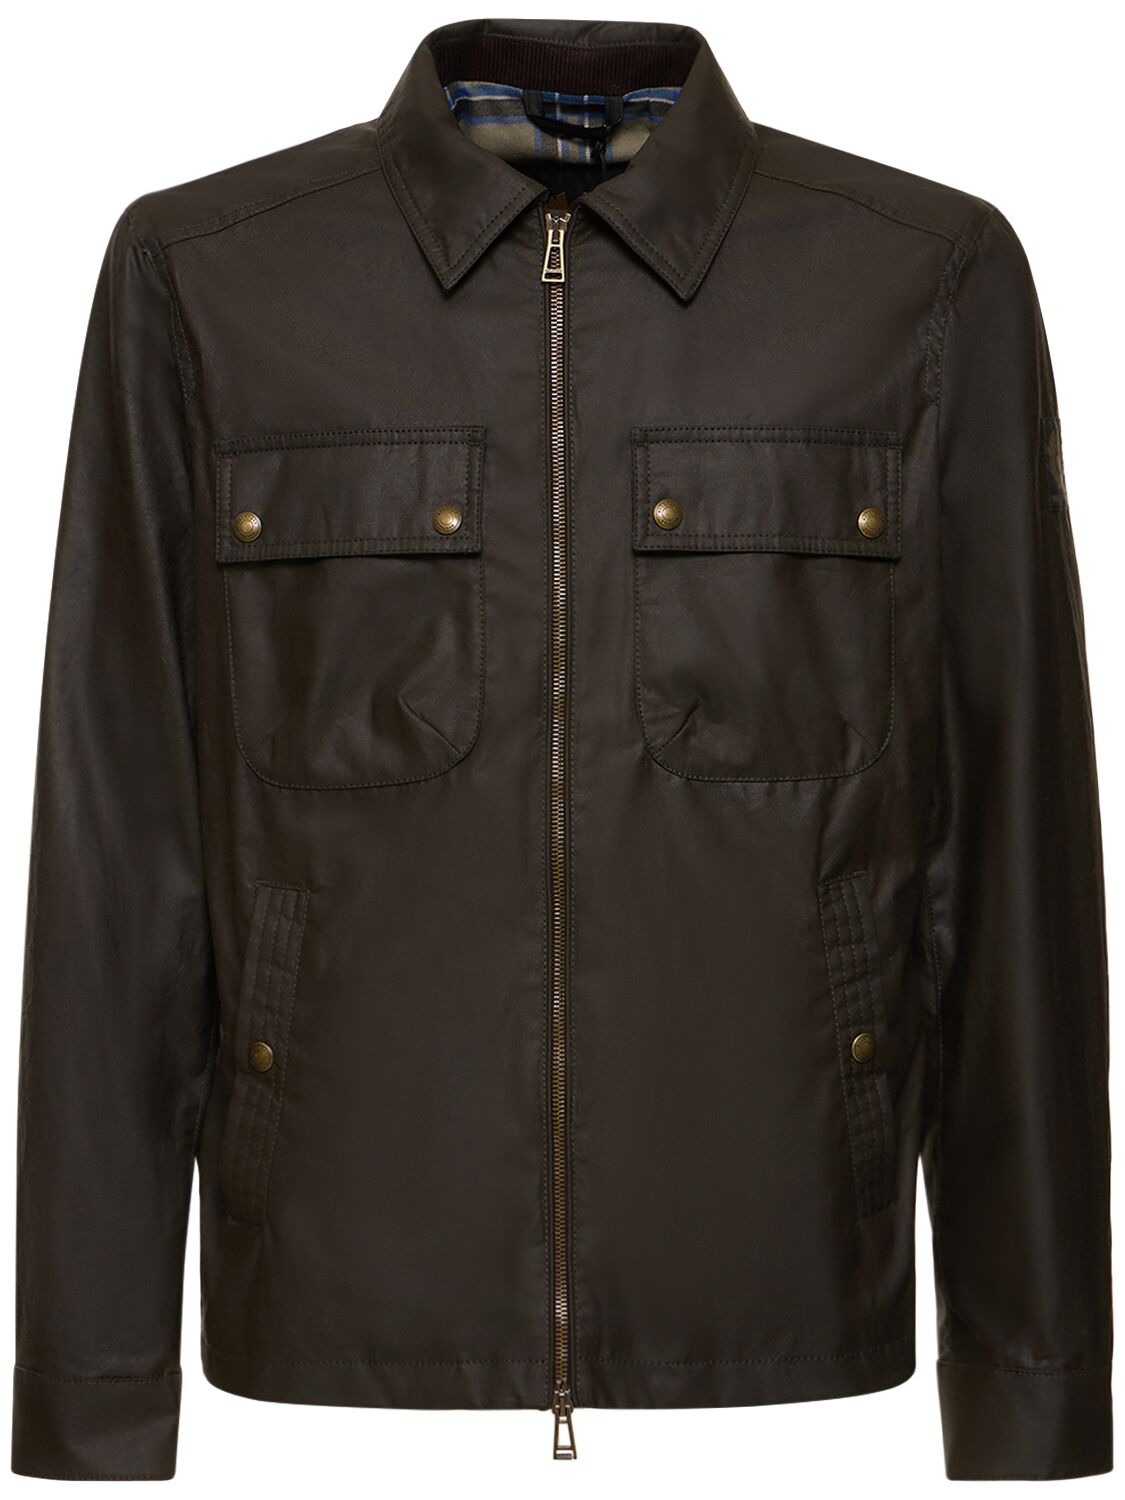 Belstaff Tour Waxed Cotton Overshirt Jacket In Olive Green